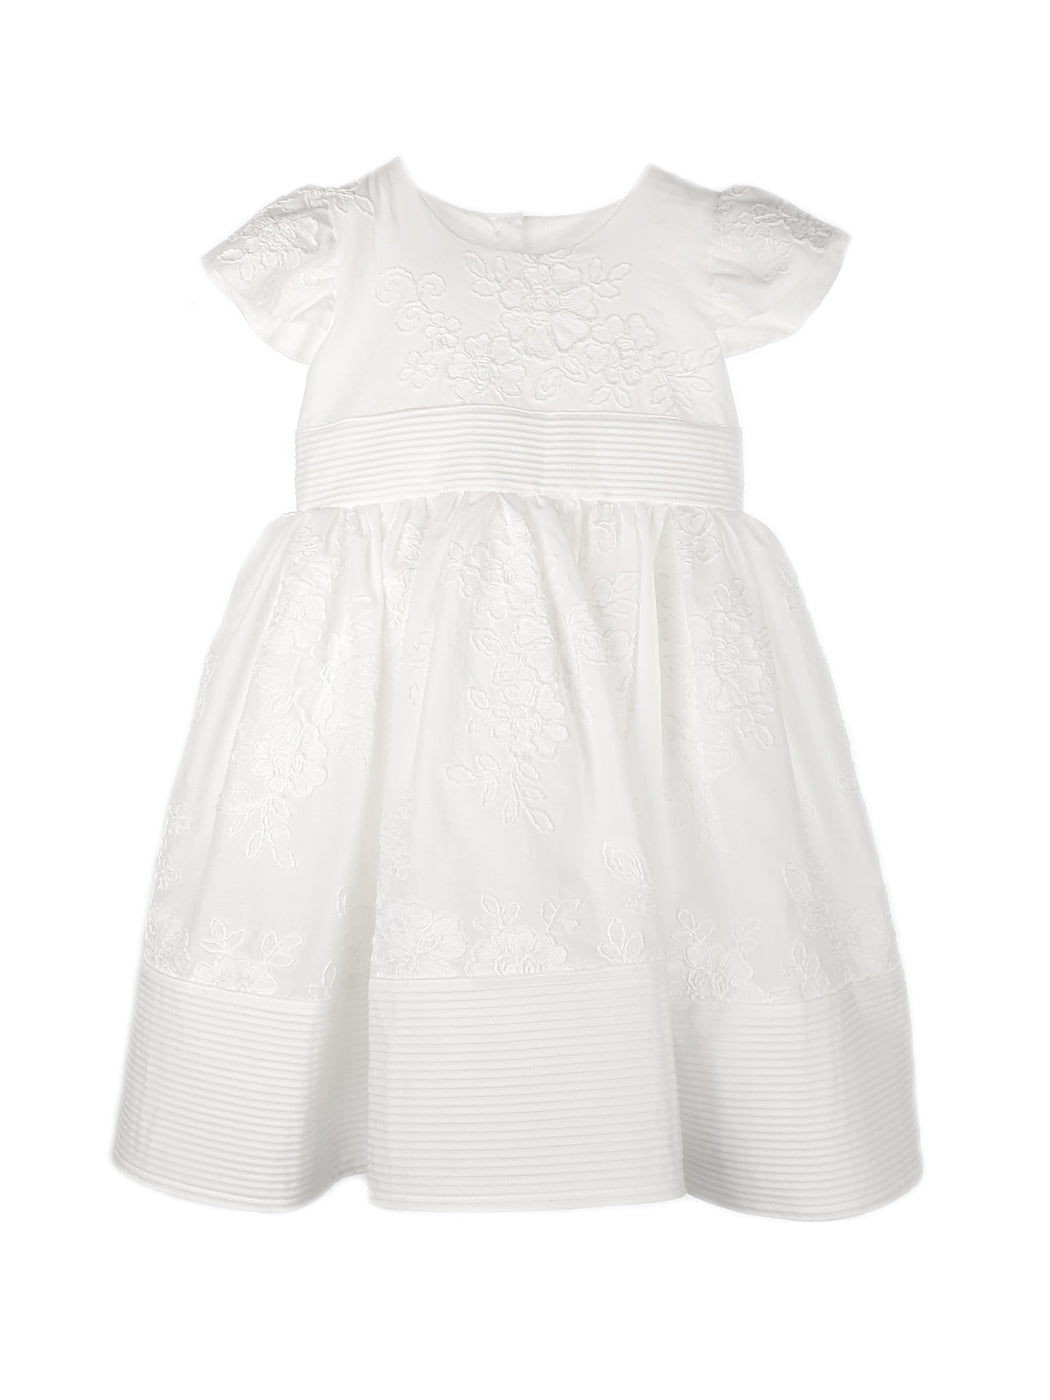 Girl's Εmbroidered dress - BRIO white